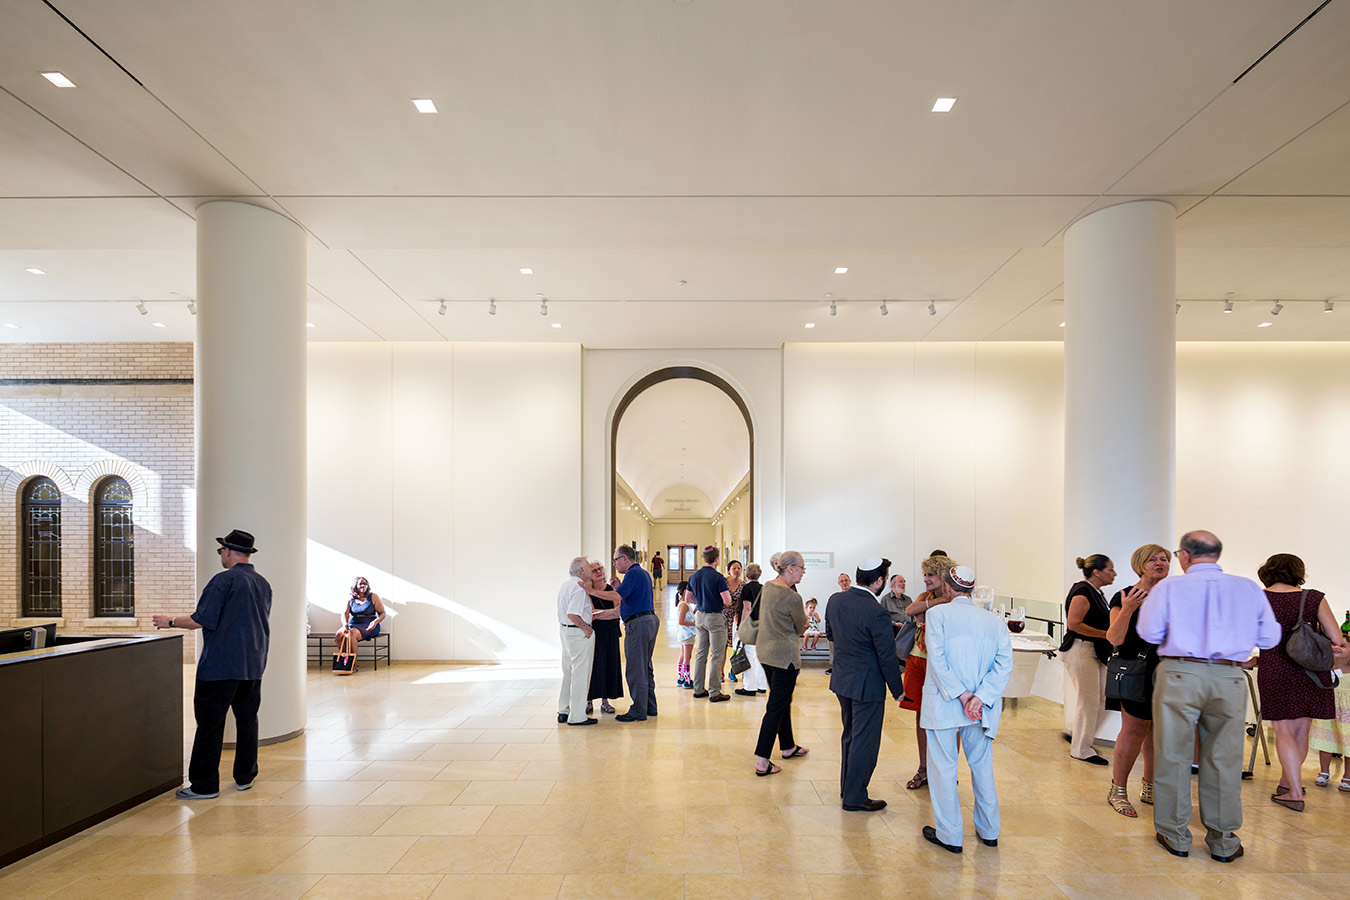 <p>The new southern entrance's lobby provides direct connections to the historic Thalhemier Lobby, as well as all of the synagogue's religious, educational, meeting, and social spaces. <br><small>&copy;James Ewing Photography</small></p>